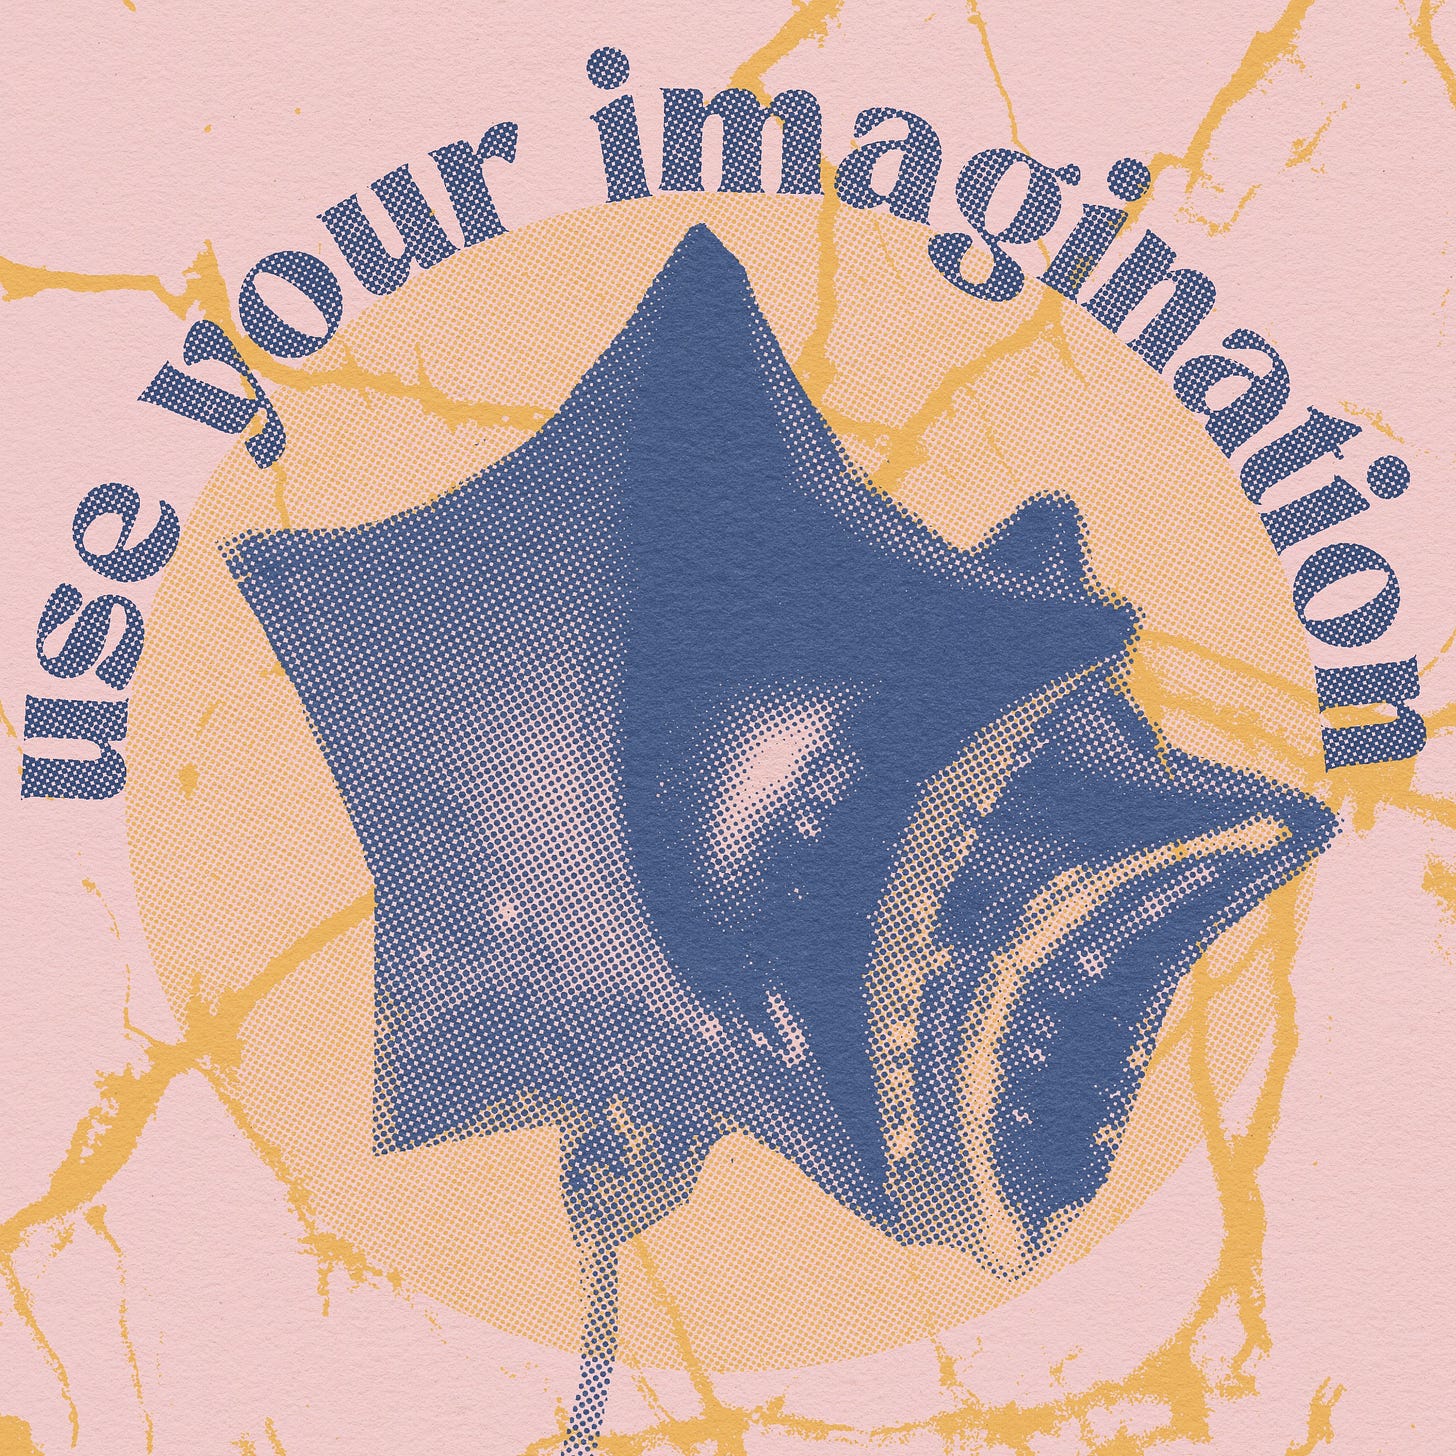 a halftone photograph of blue mylar balloons with the words "use your imagination"